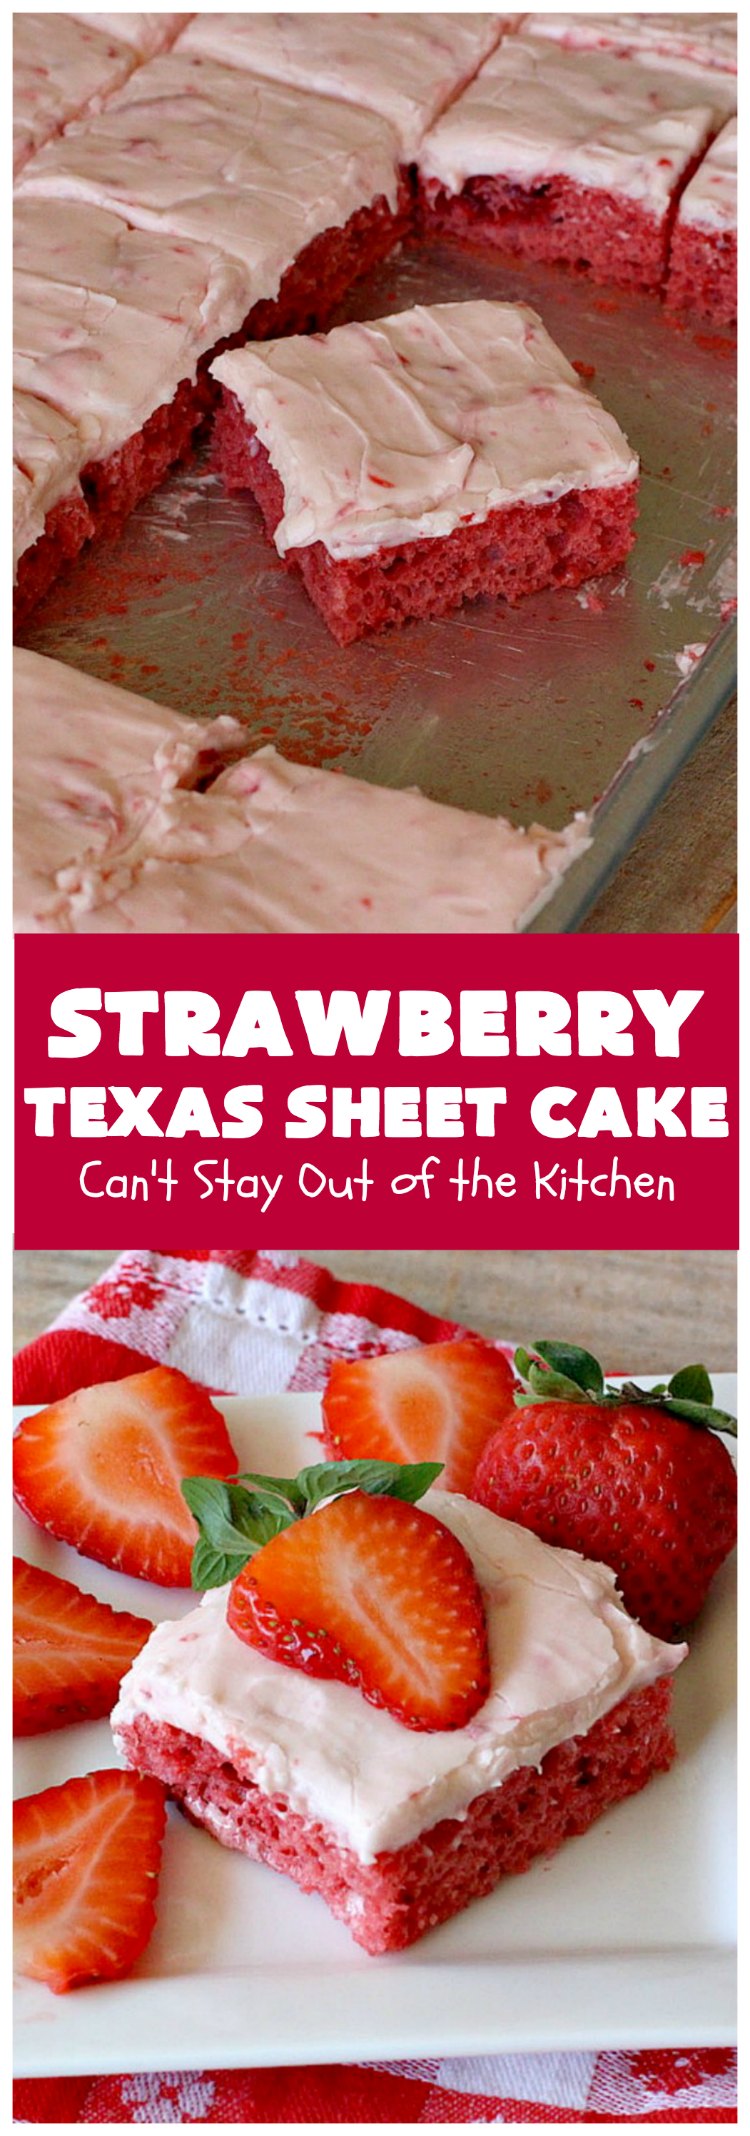 Strawberry Texas Sheet Cake | Can't Stay Out of the Kitchen